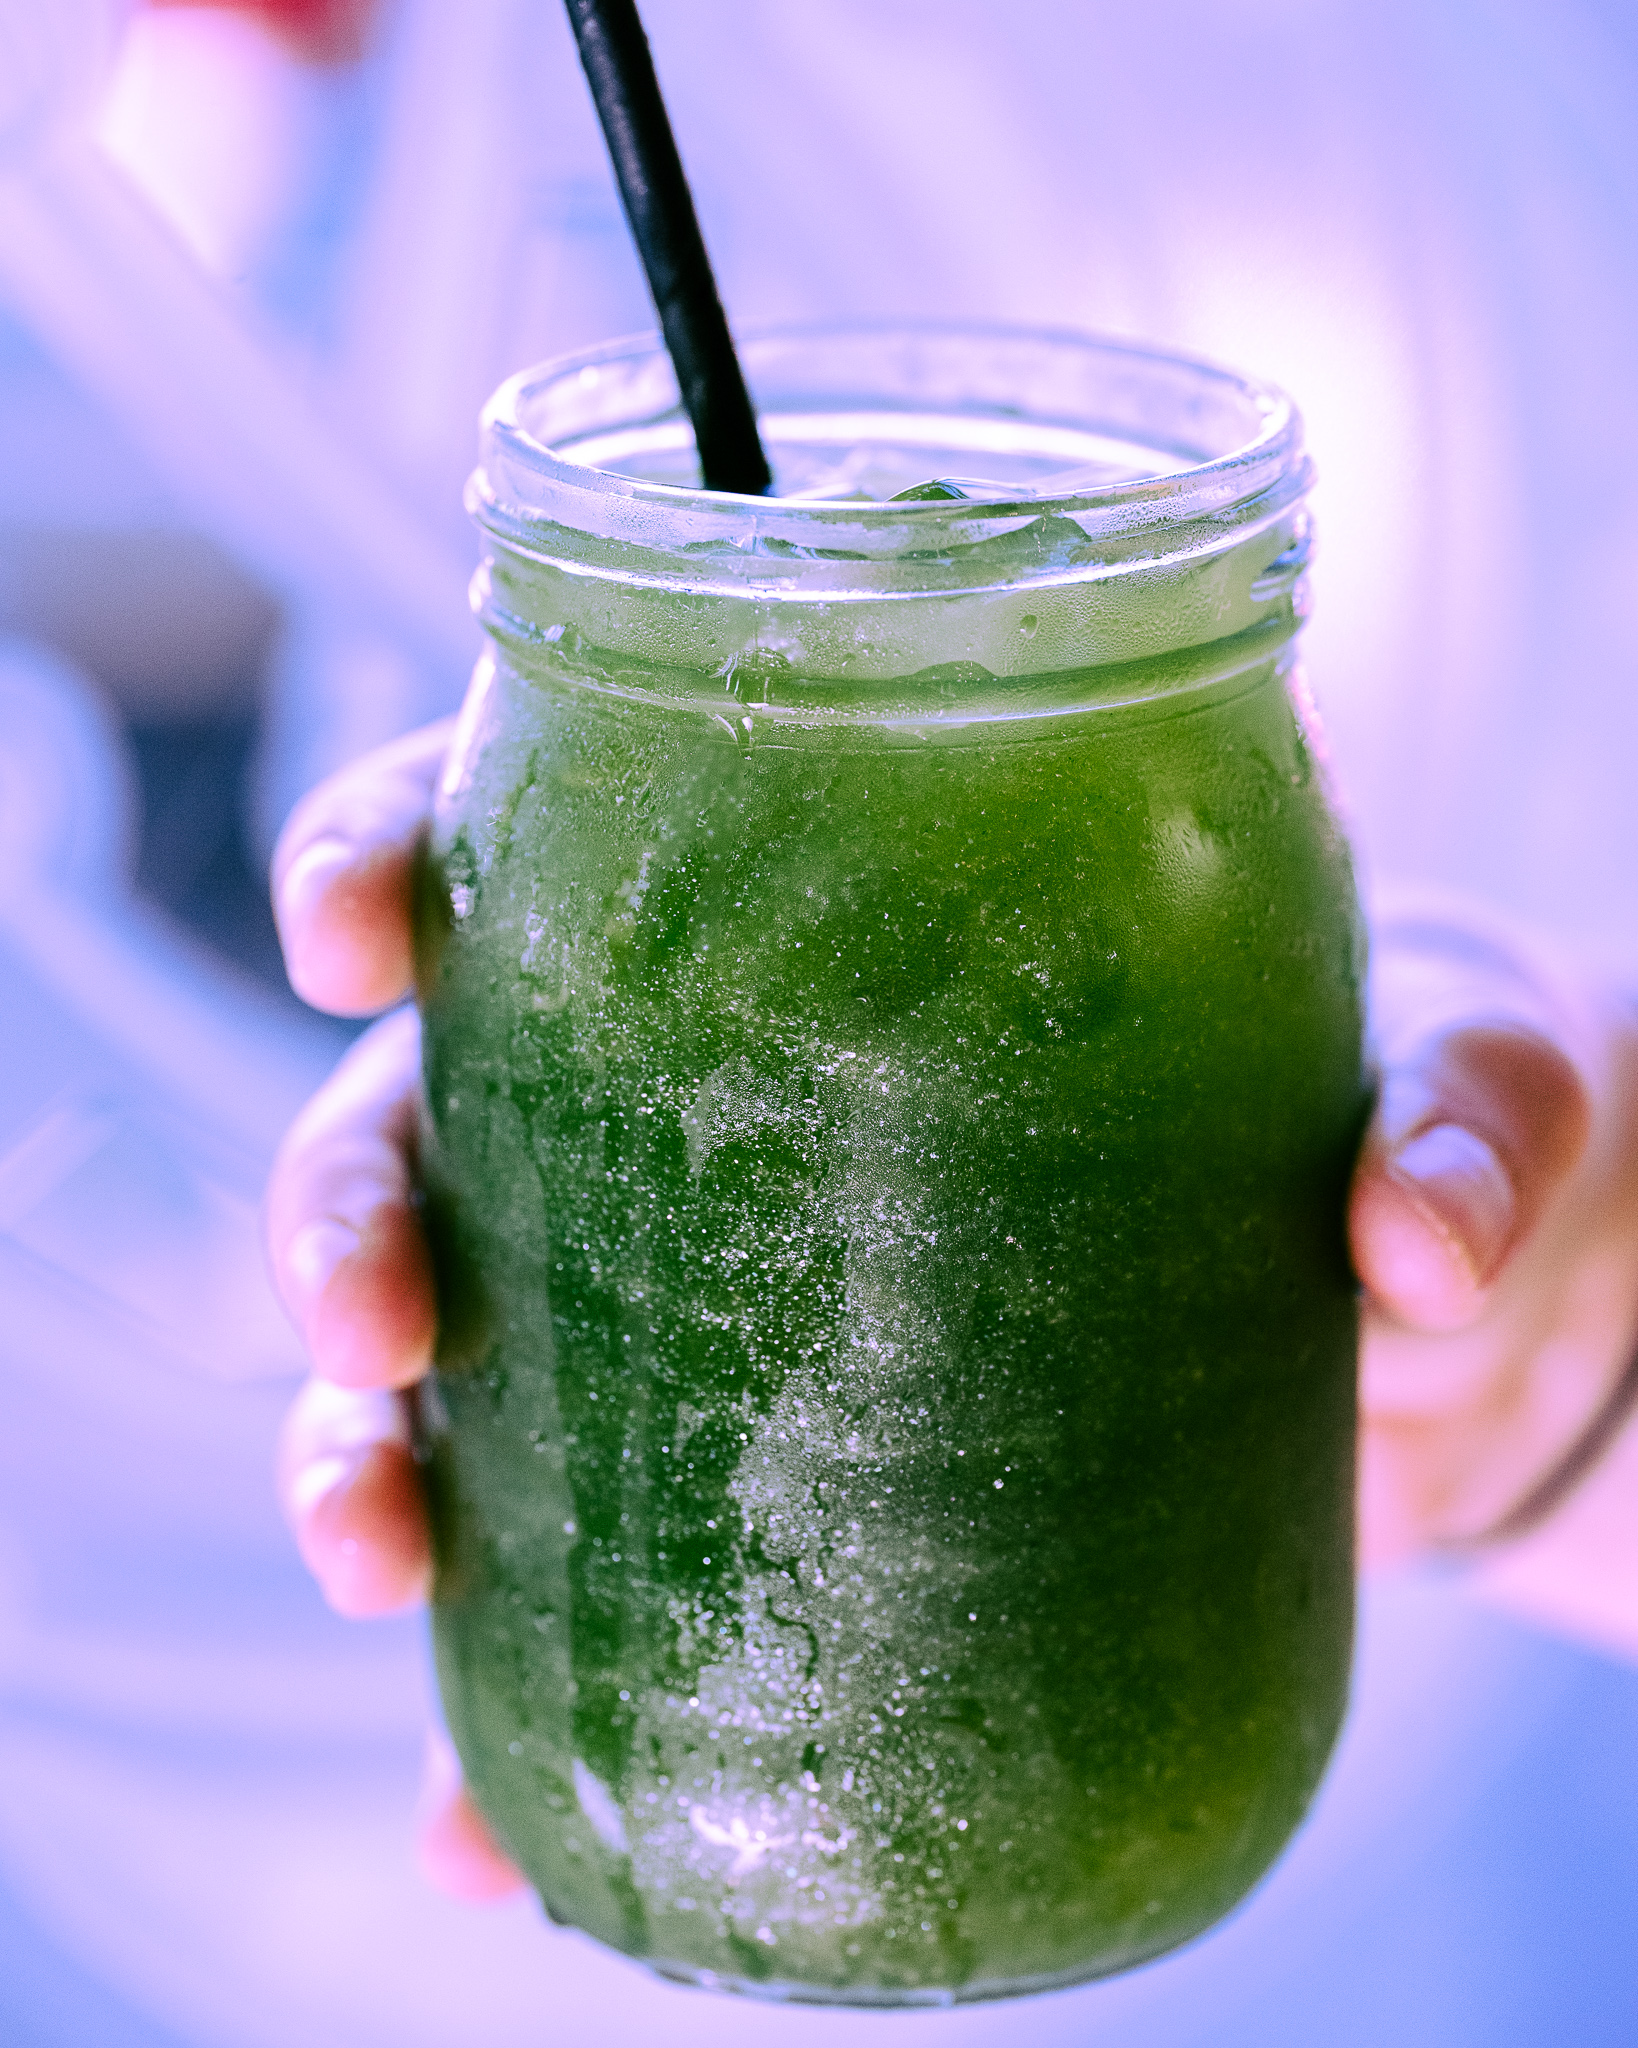 close up of a hand holding a glass jar containing a bright green iced tea drink with shiny edible glitter